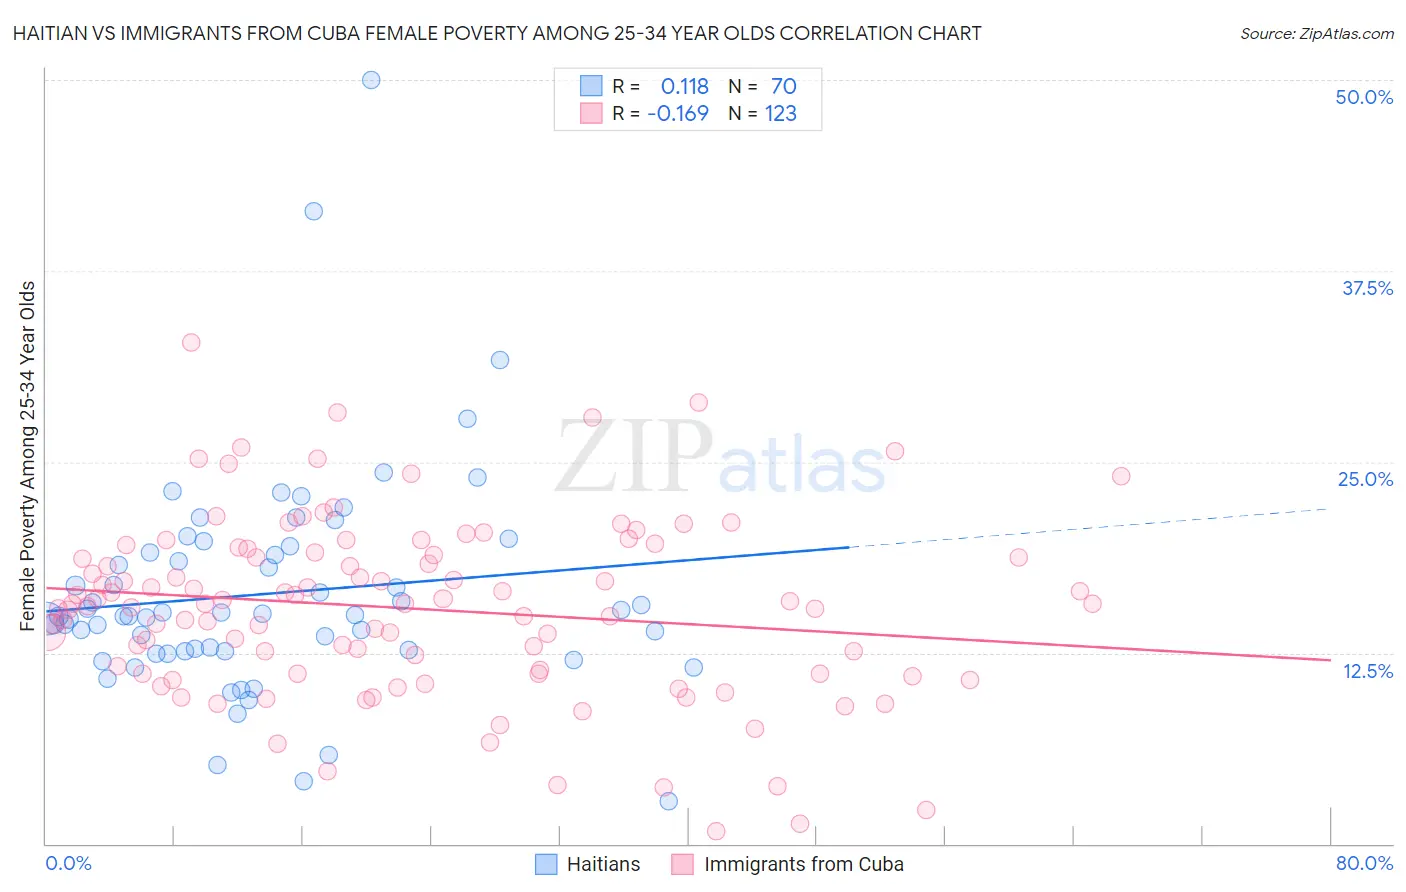 Haitian vs Immigrants from Cuba Female Poverty Among 25-34 Year Olds